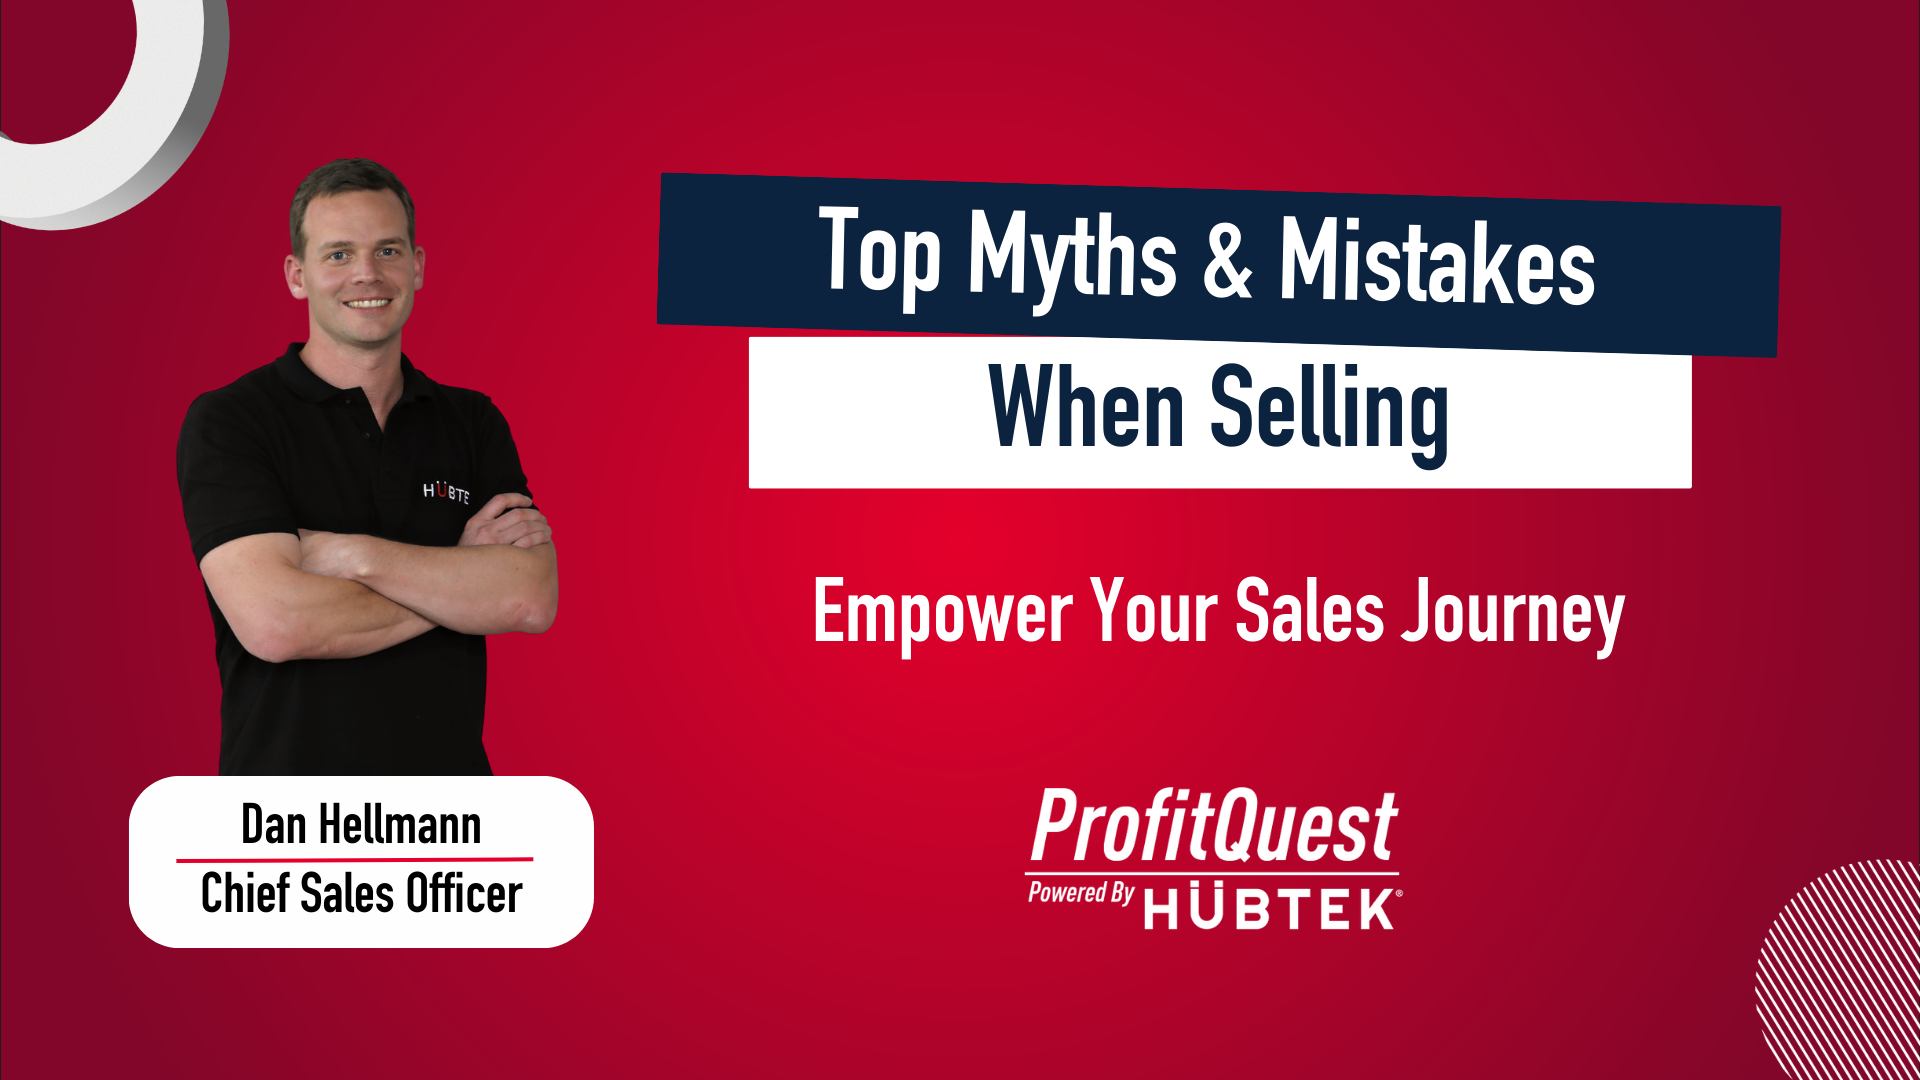 Top Myths & Mistakes When Selling